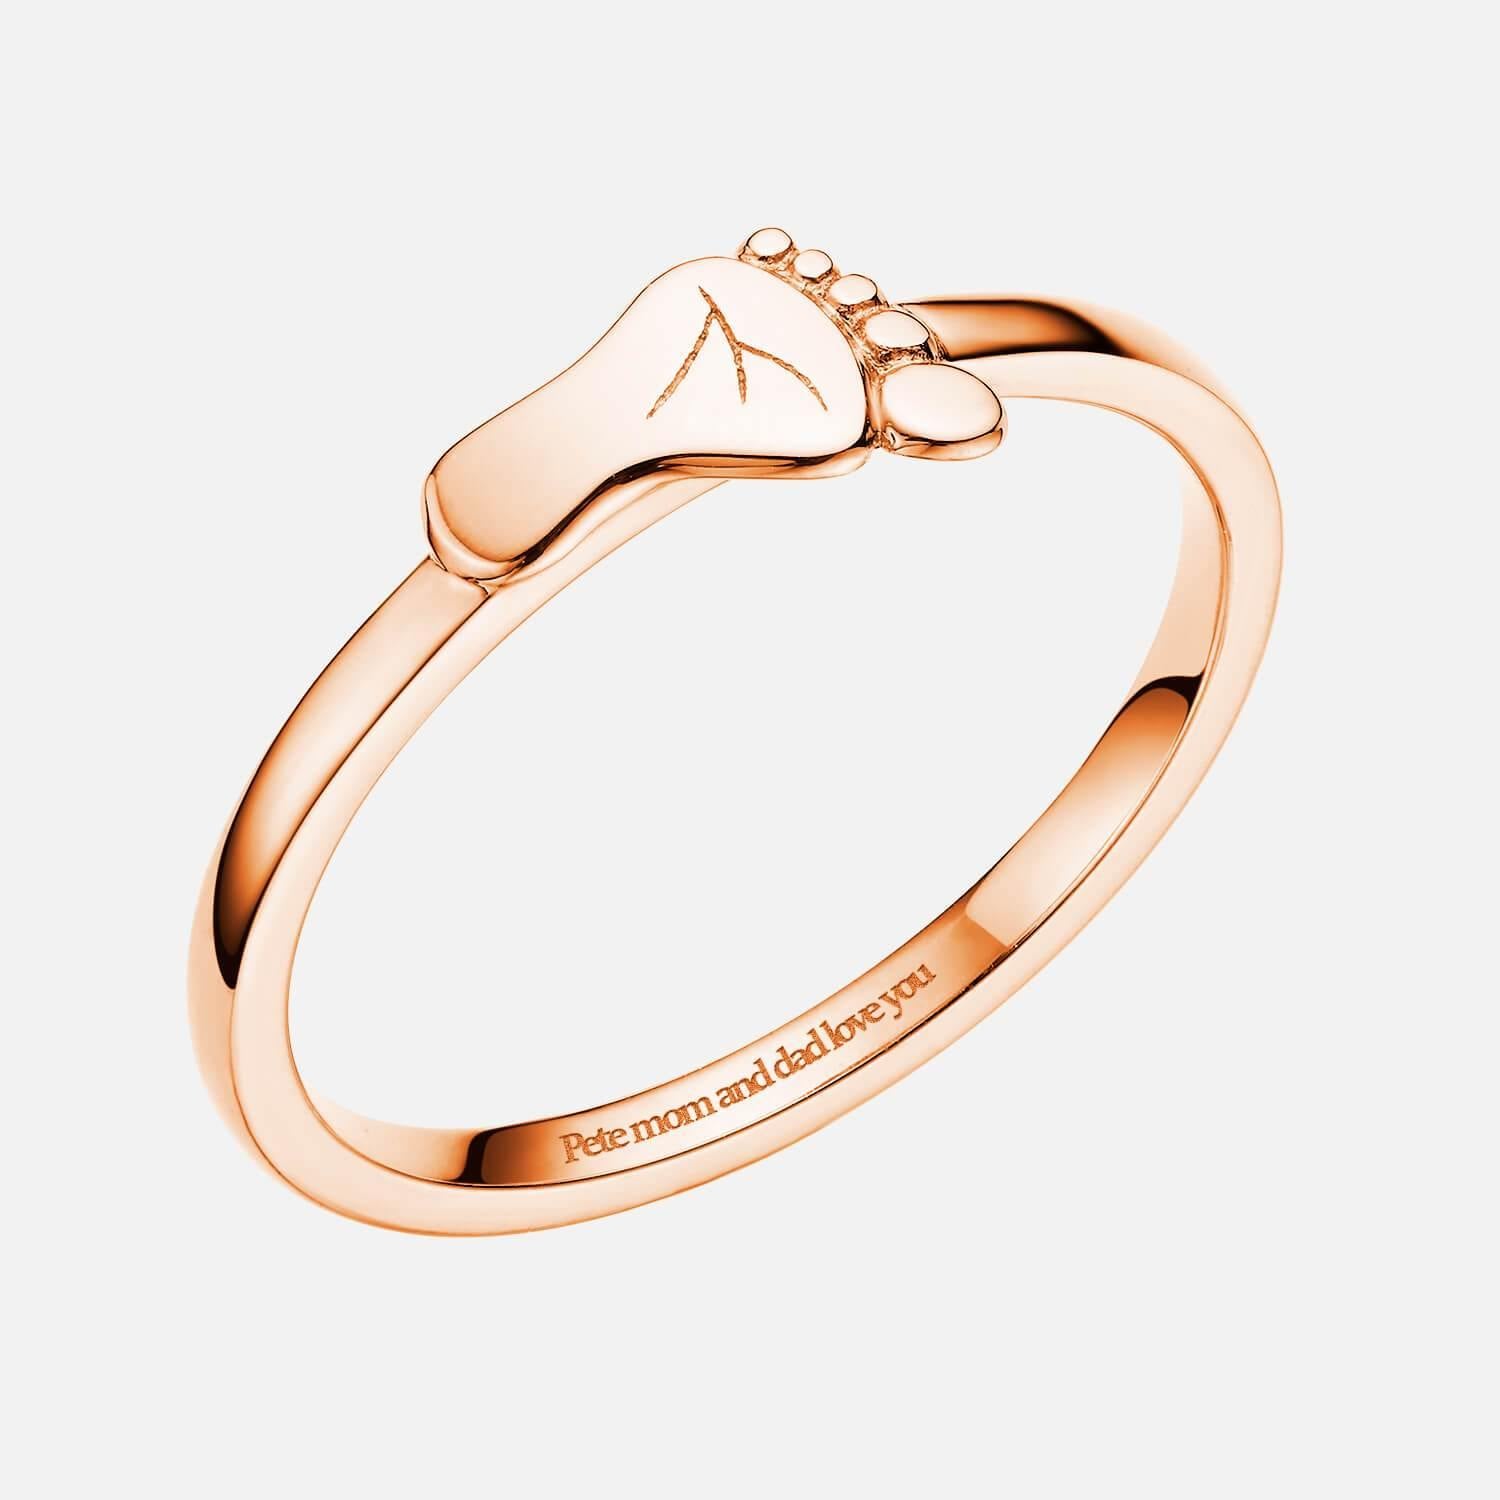 Showroom of 18kt rose gold antique design couple ring | Jewelxy - 167514